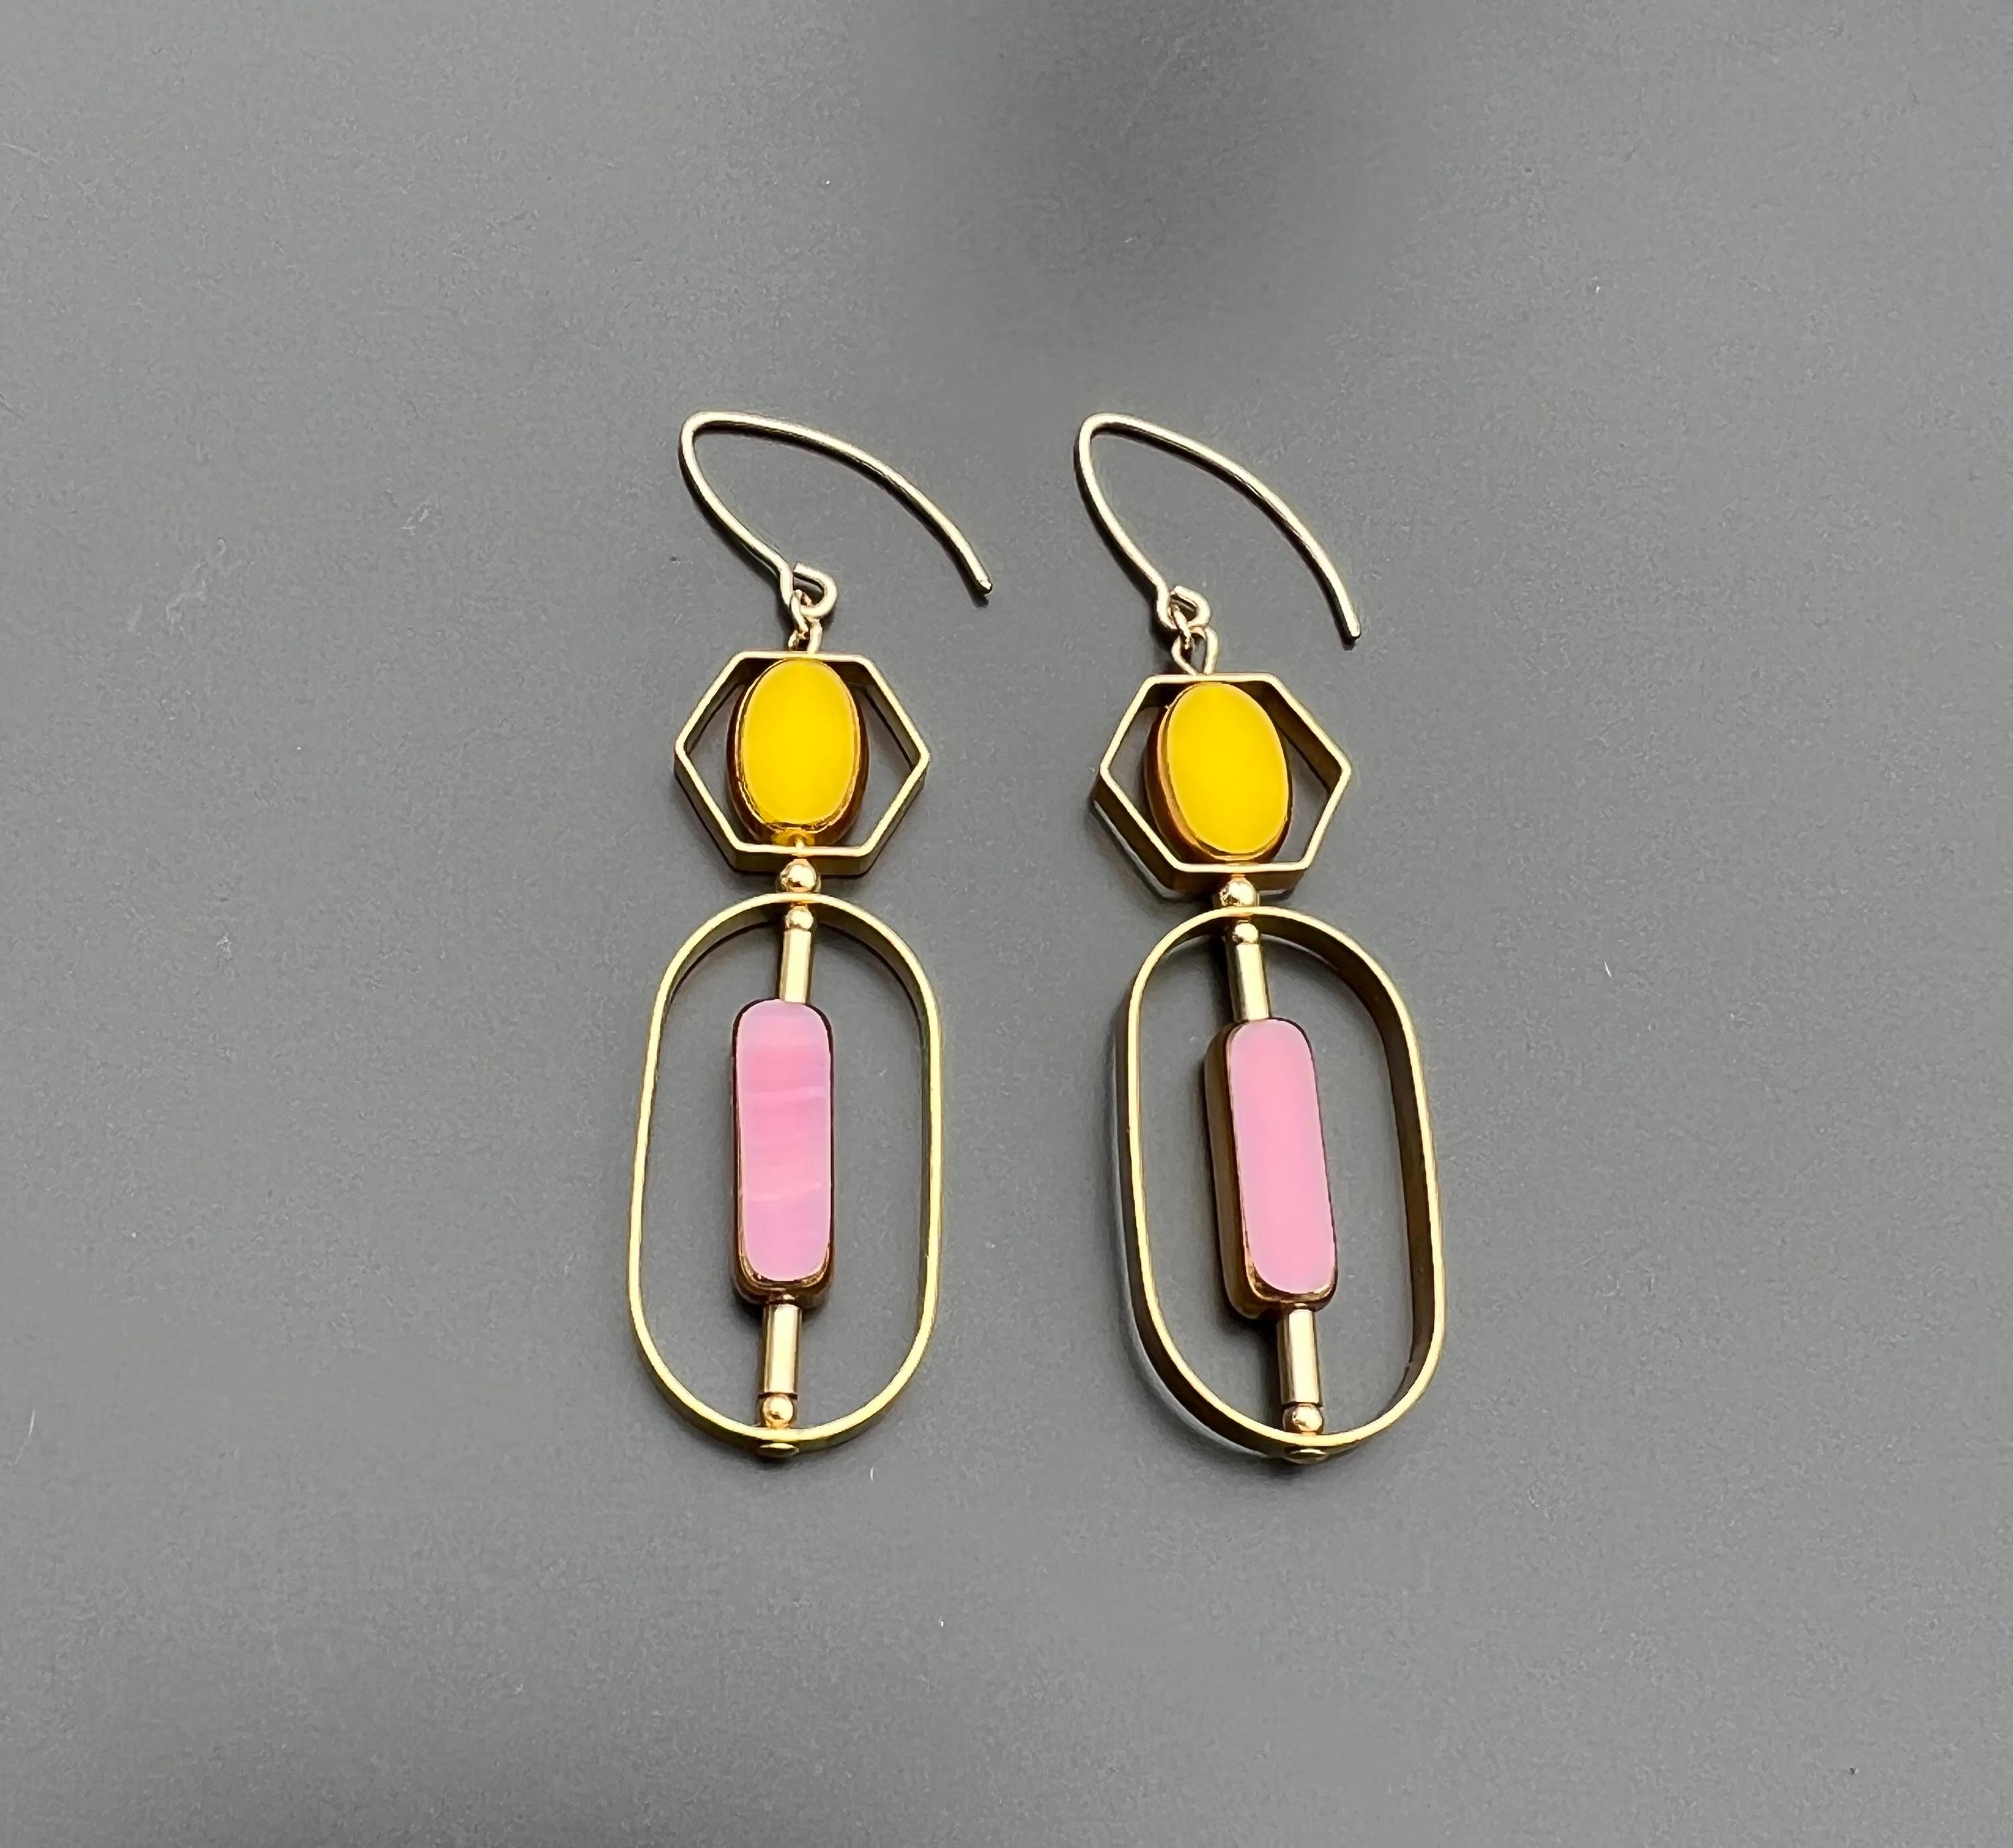 The earrings are light weight and are made to rotate and reposition with movement.

The earrings consist of a yellow oval and pink long rectangular shaped beads. They are new old stock vintage German glass beads that are framed with 24K gold. The